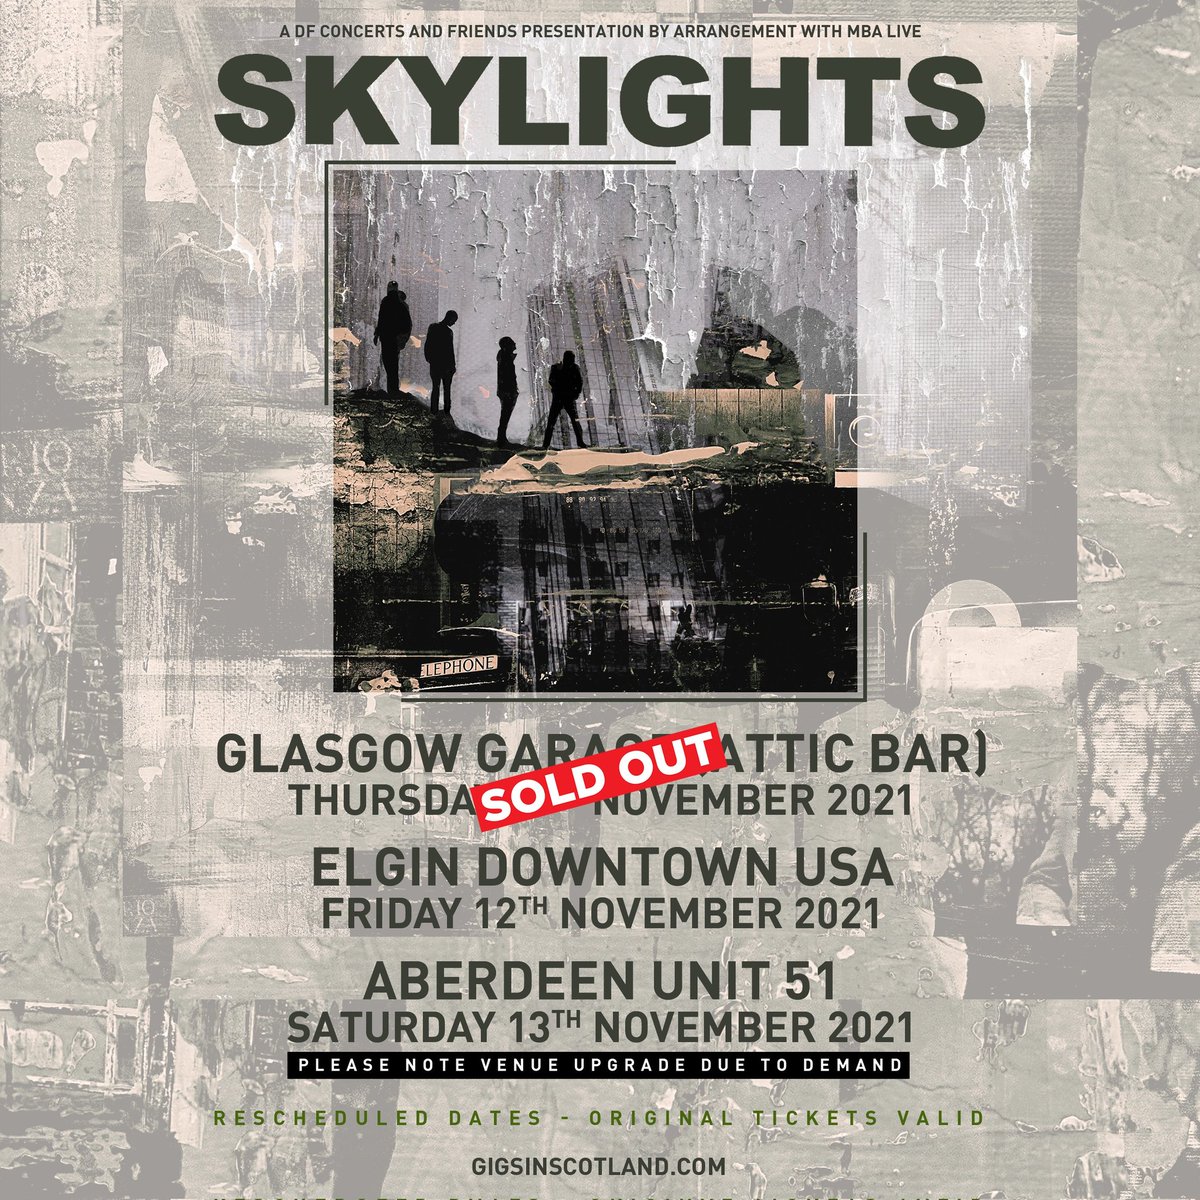 SCOTLAND 🏴󠁧󠁢󠁳󠁣󠁴󠁿 We’re sorry we can’t see you in August due to restrictions still being in place. However, new dates in November are confirmed, and we’ve added 200 extra tickets in Aberdeen at Unit 51! Be quick, tickets go on sale tomorrow at 10am here > gigsinscotland.com/artist/skyligh…